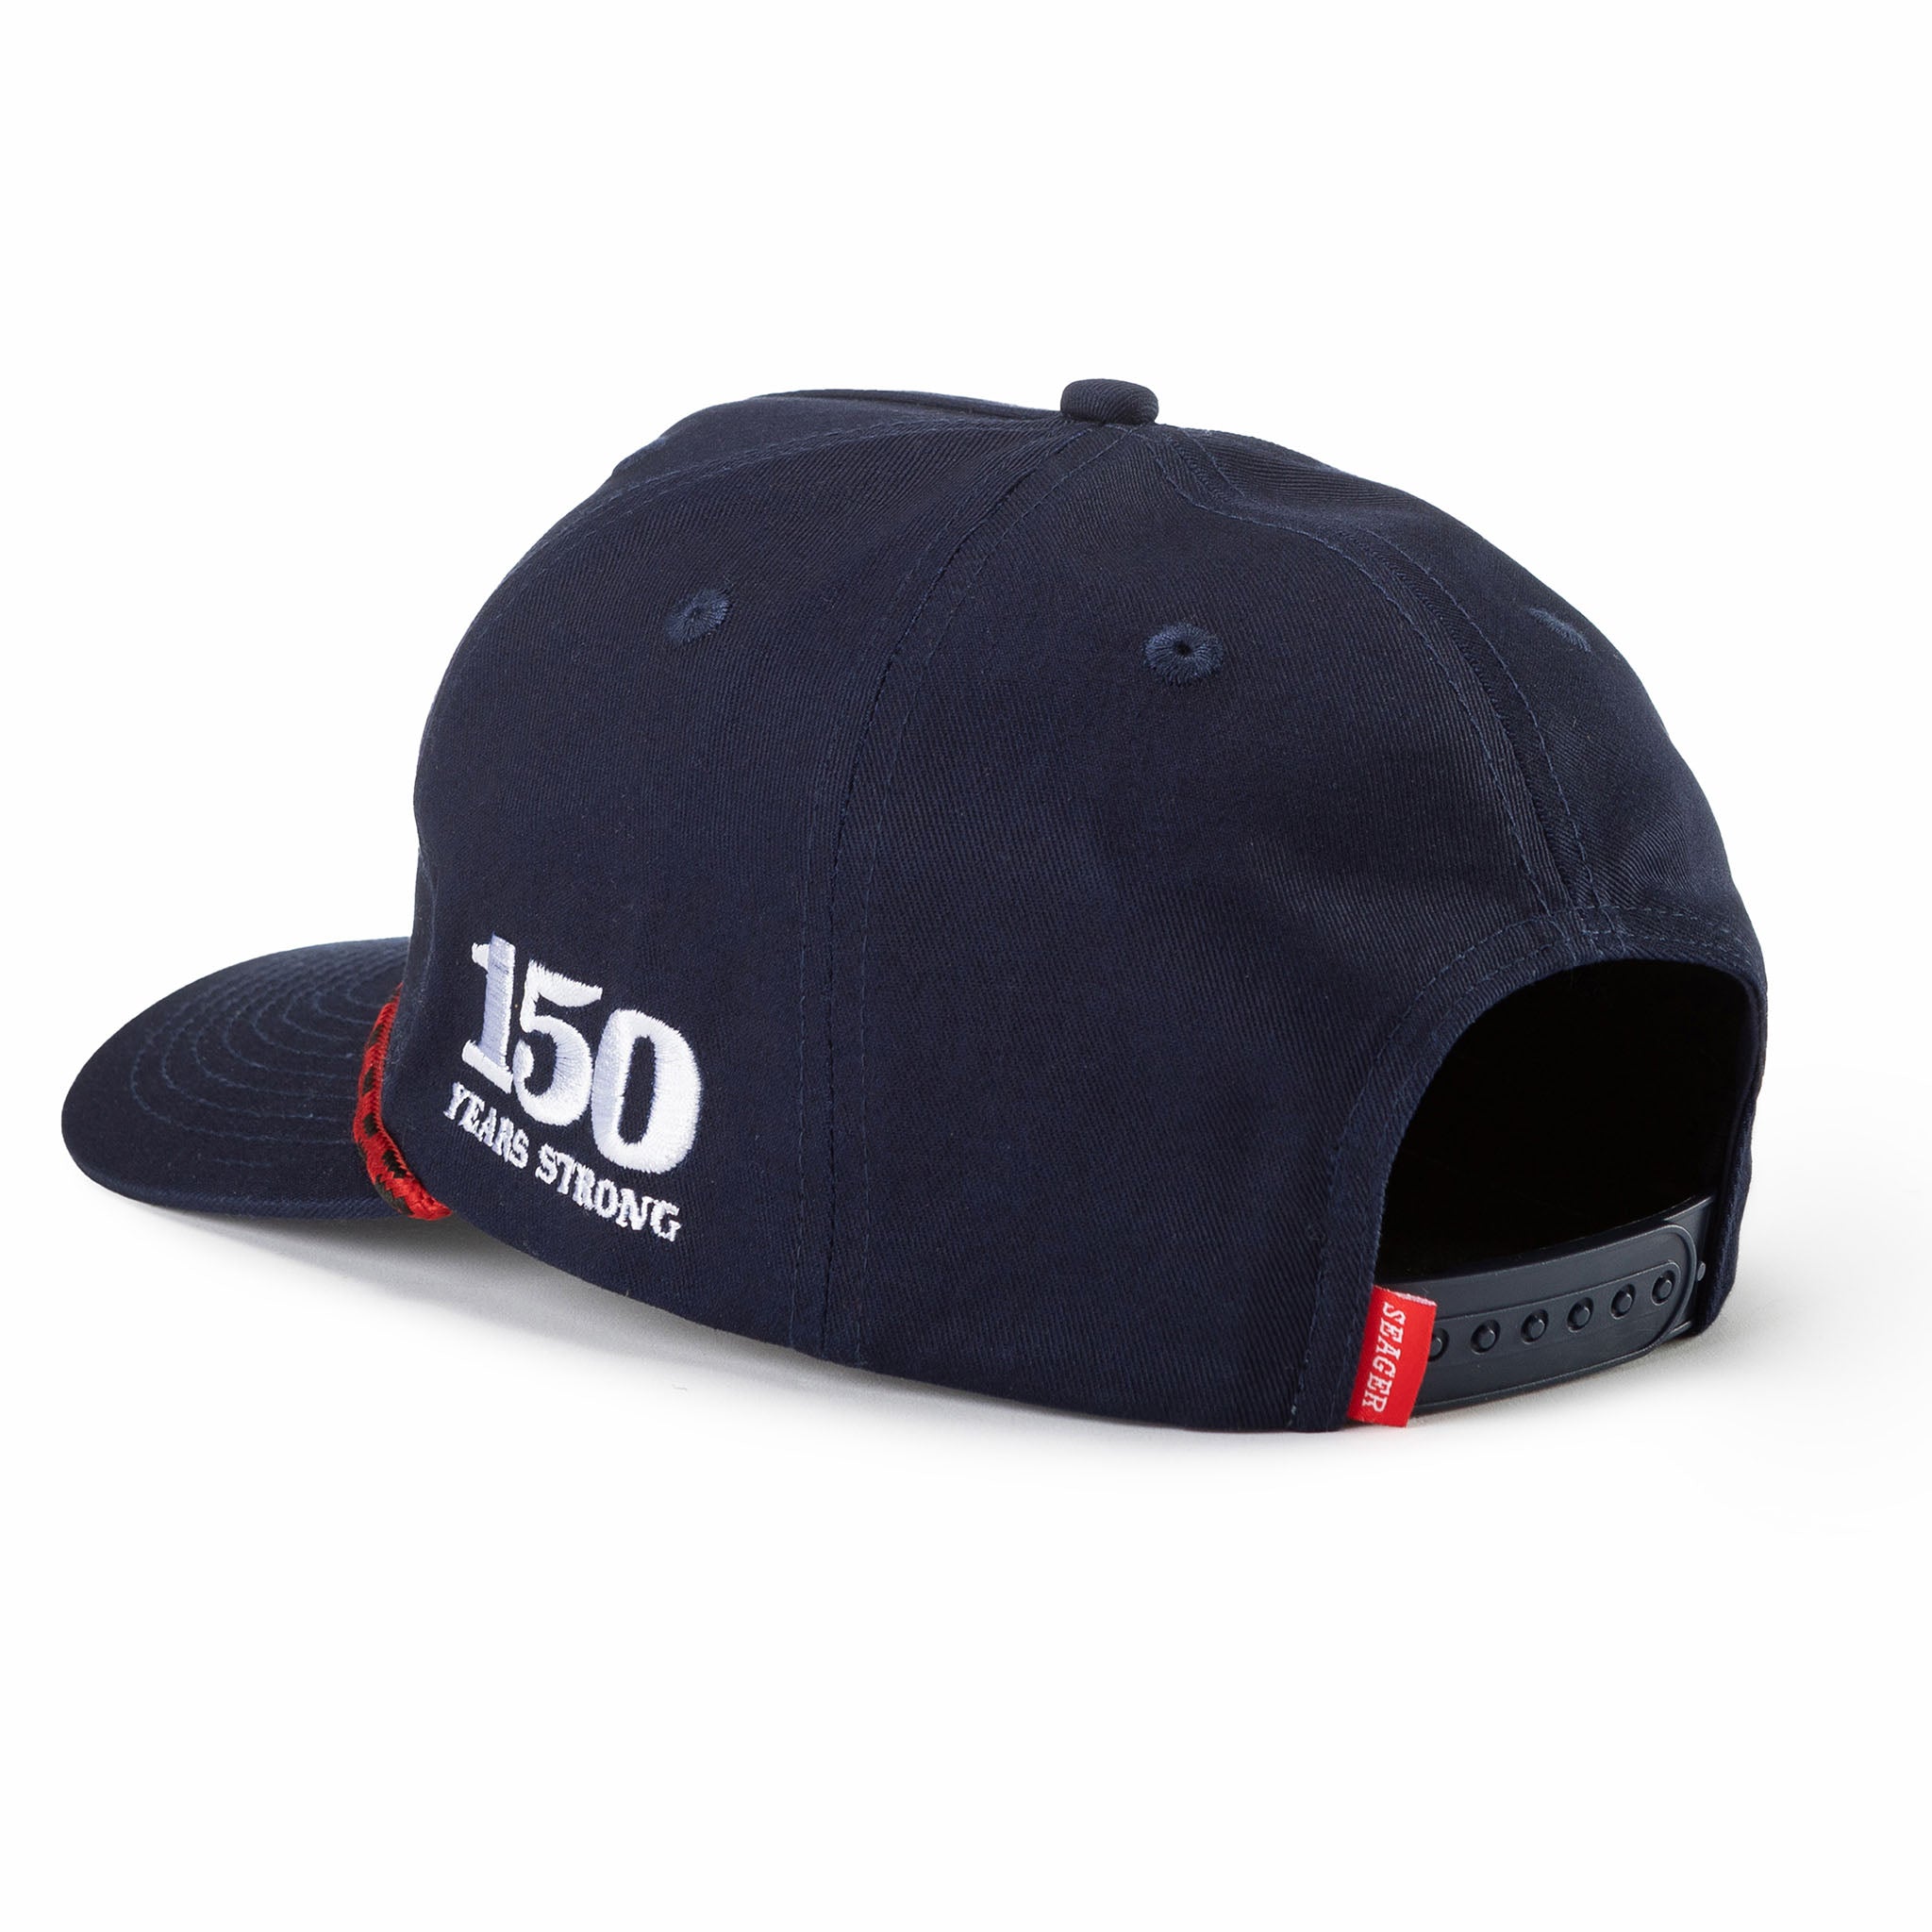 SEAGER X COORS BANQUET ROCKY MOUNTAIN LEGEND SNAPBACK NAVY